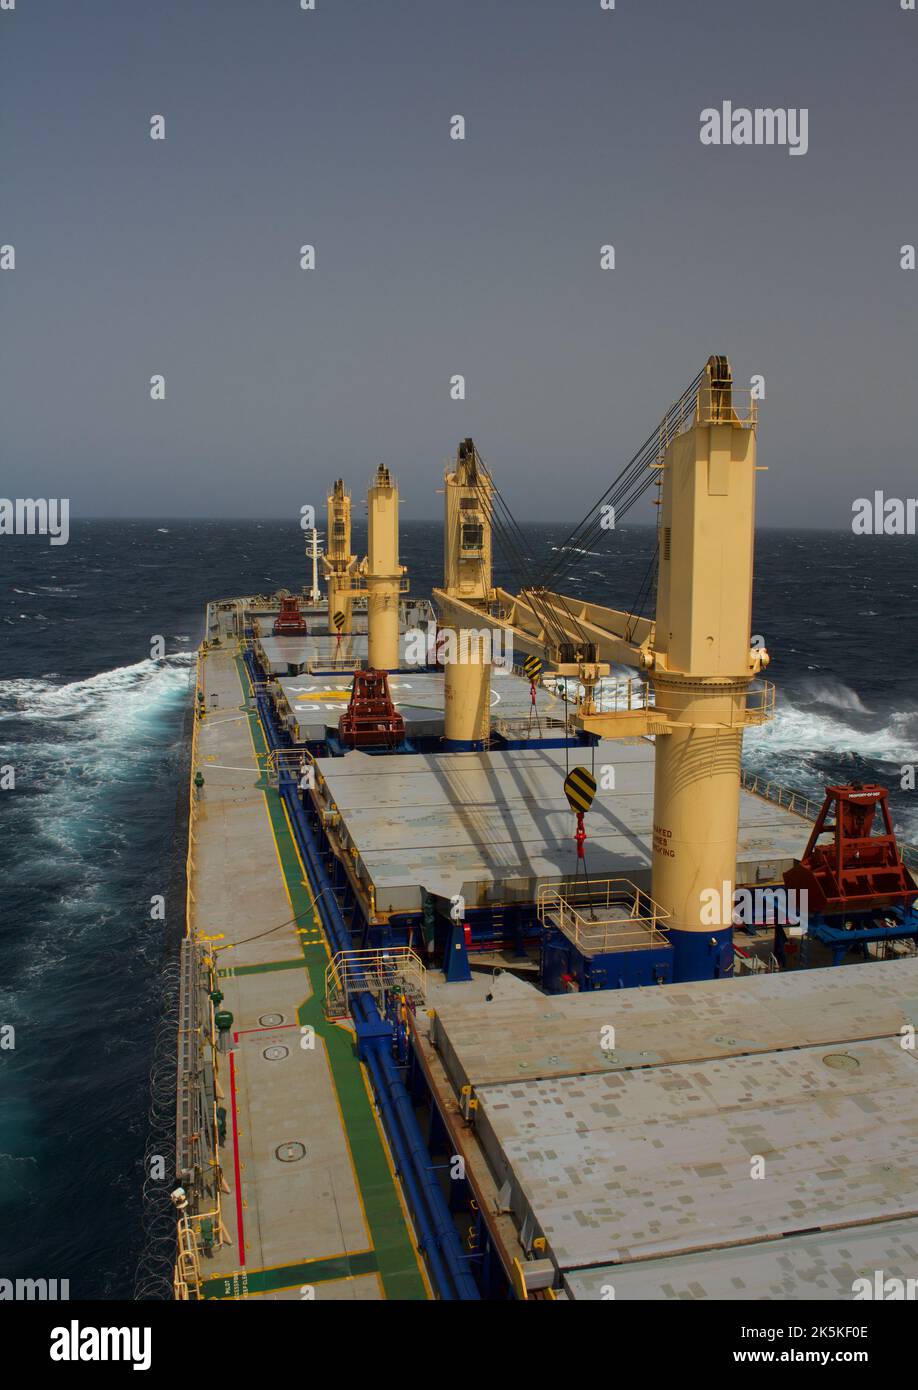 Merchant ship carrying bulk cargo is underway at sea in rough weather Stock Photo